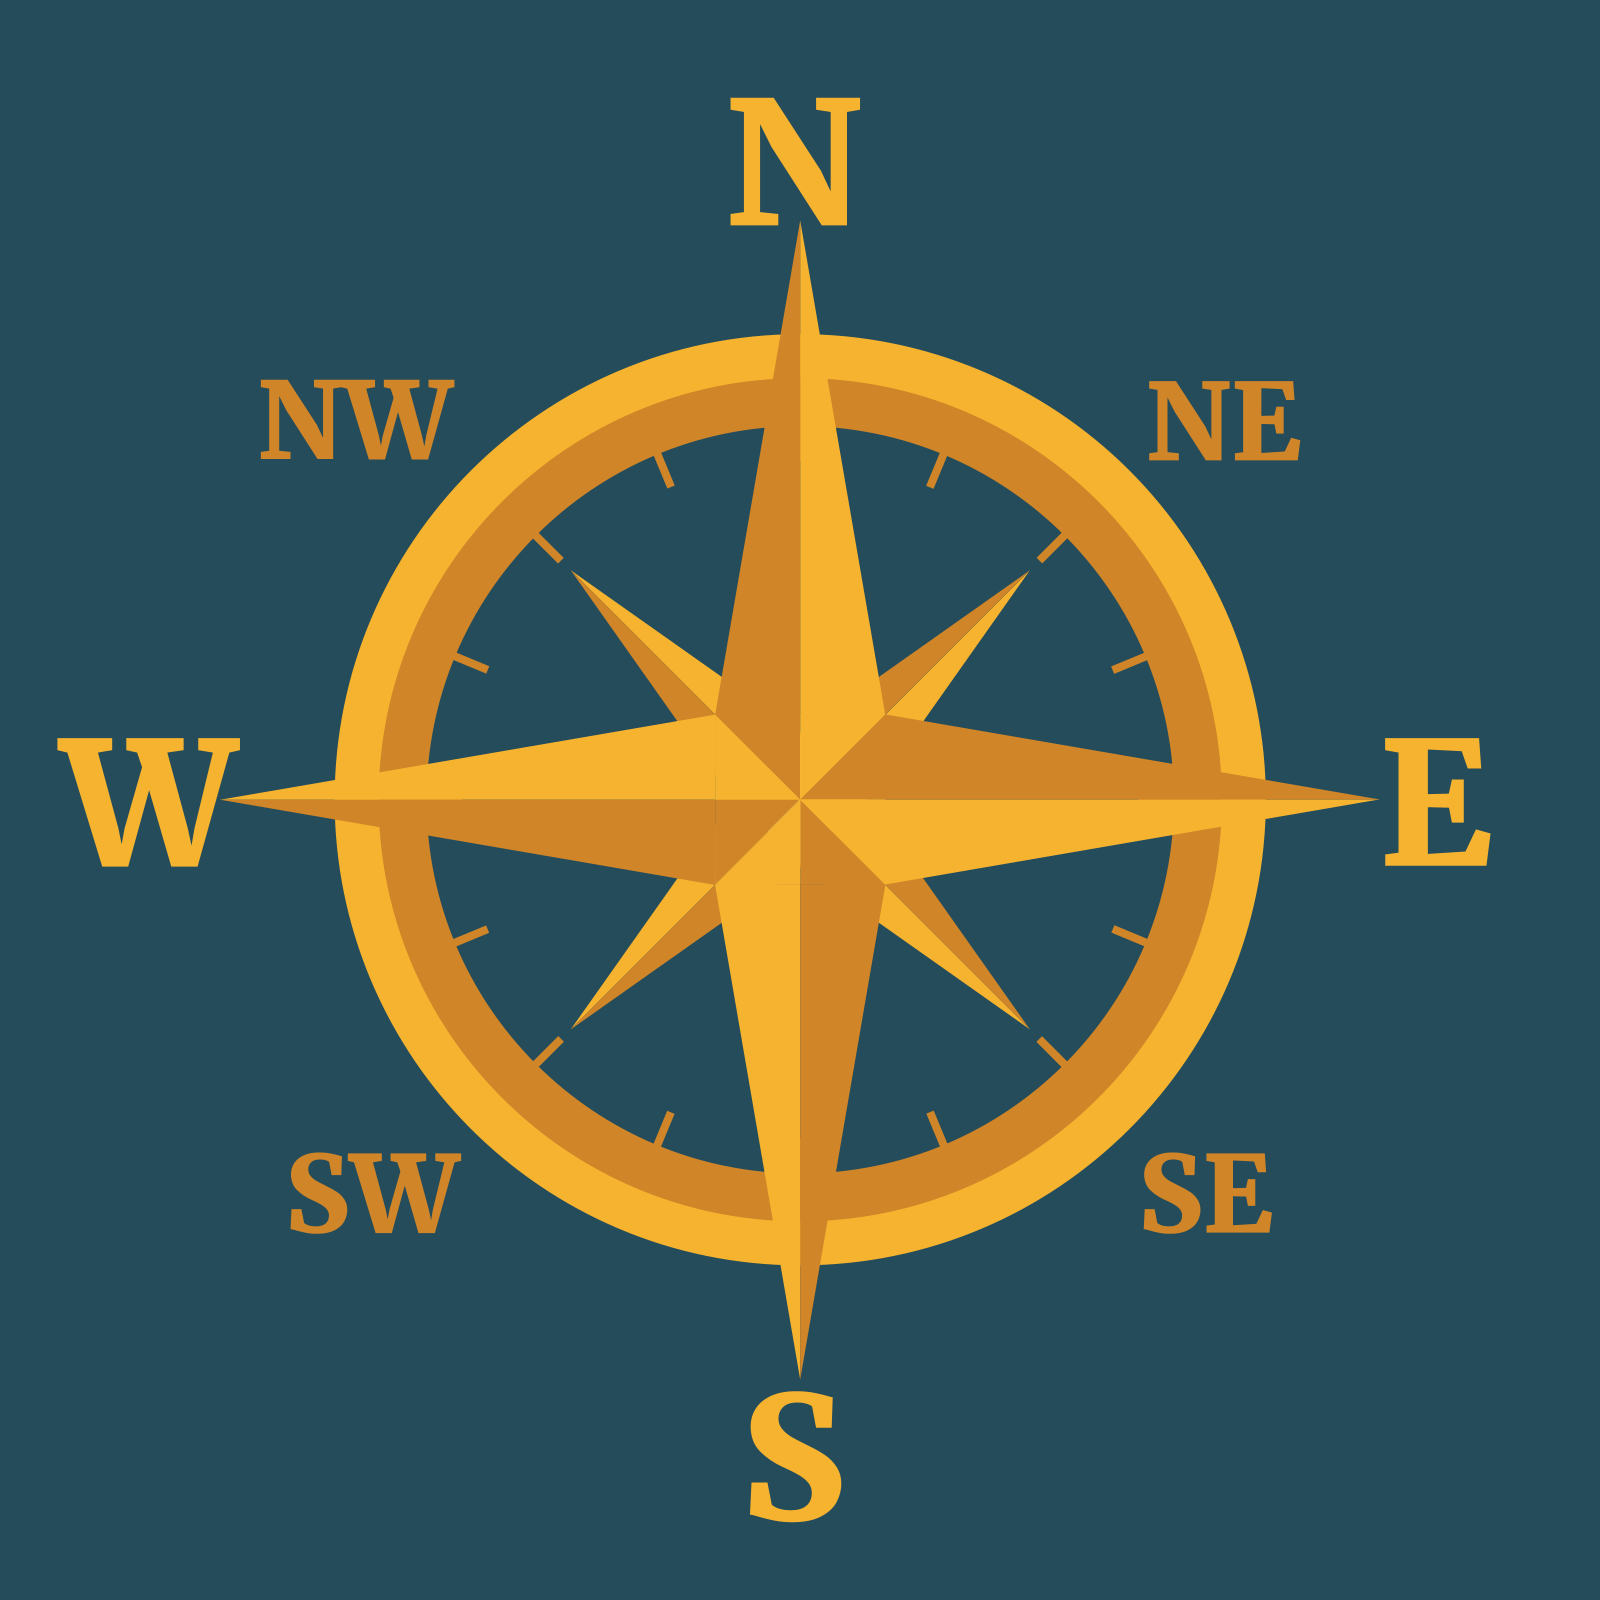 https://shapegrams.com/wp-content/uploads/2022/04/Compass-Rose-Featured-Image-1600x1600.png